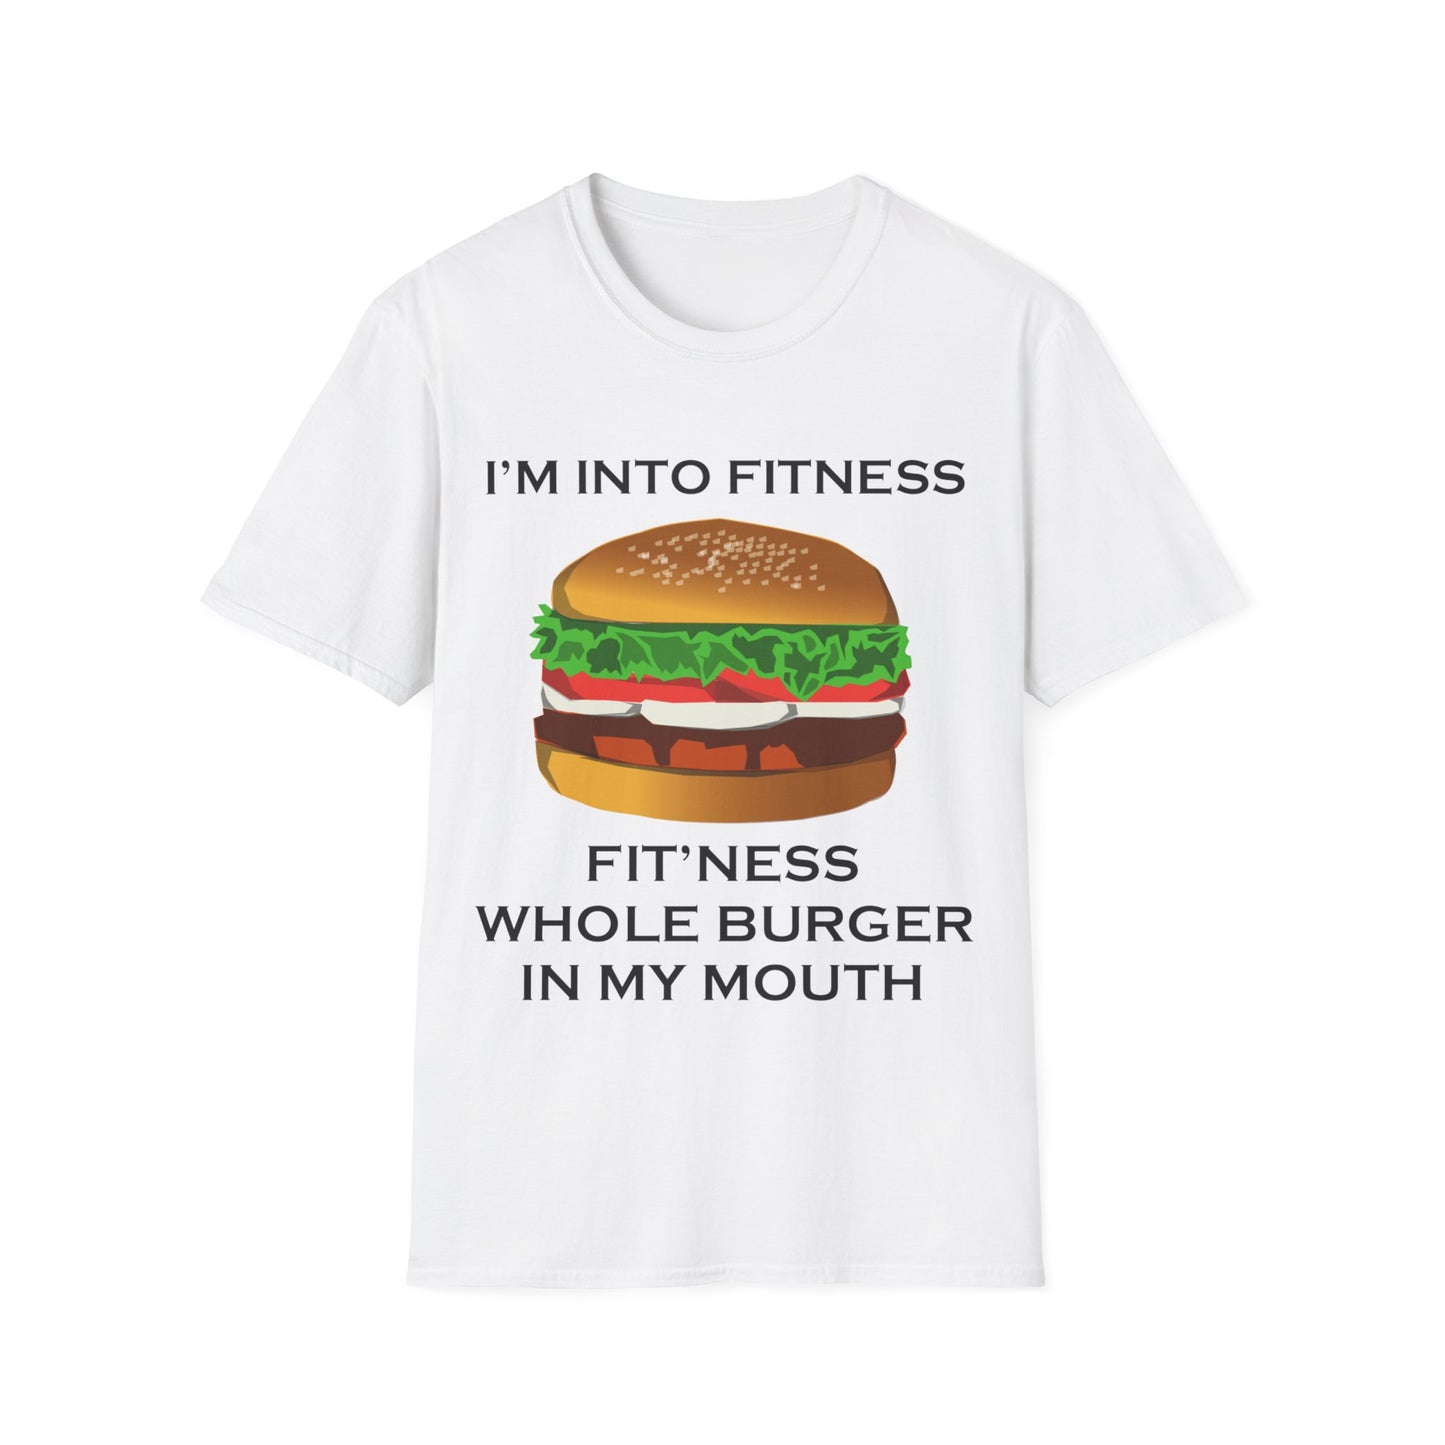 A white t-shirt with a design of a burger and the funny quote: I'm Into Fitness, Fit'ness Whole Burger In My Mouth